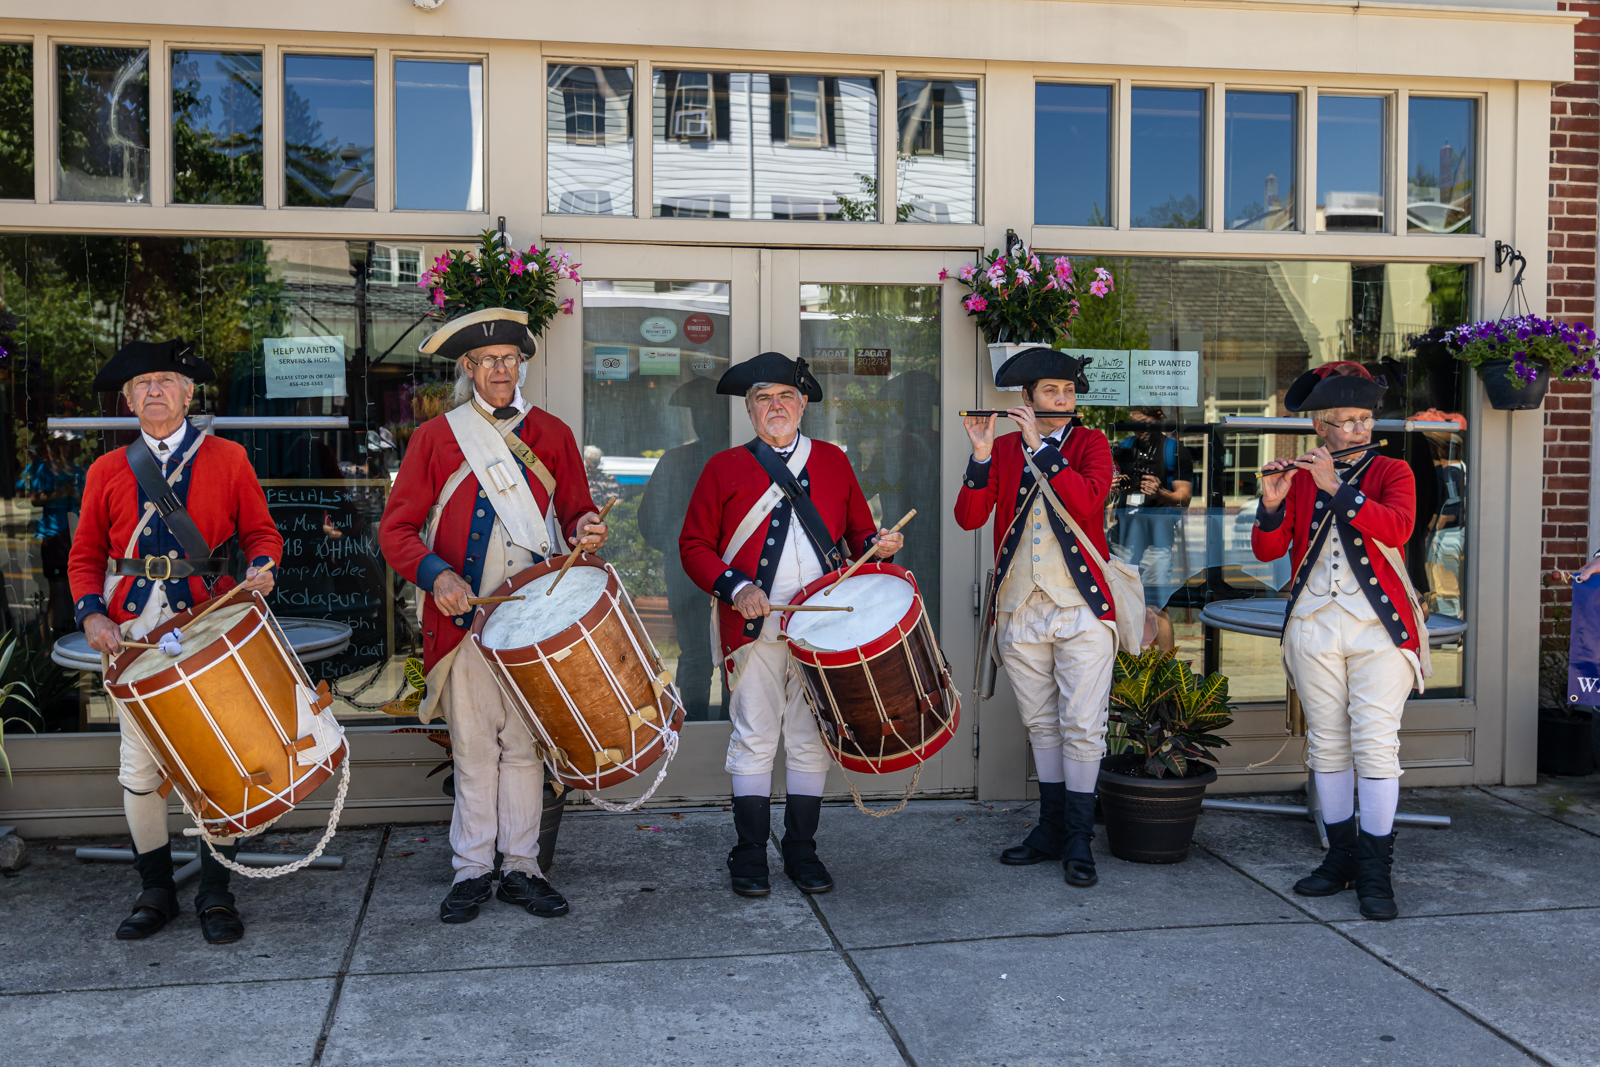 Fife and Drum Players